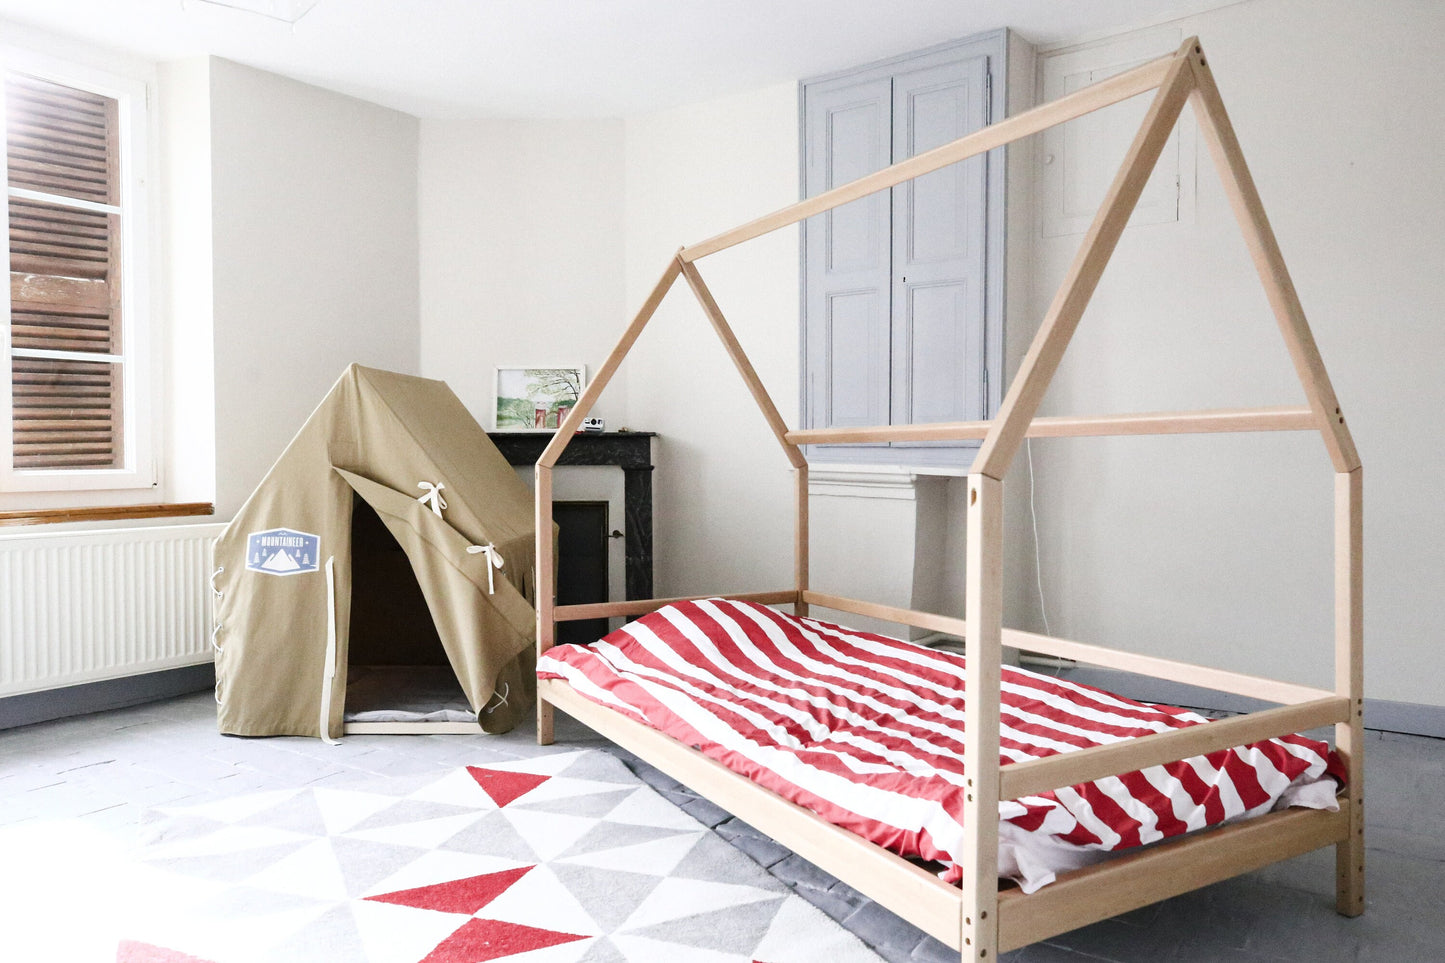 CANOPY Bed Montessori Bed Canopy Toddler Bed Frame Bed With Canopy Twin Kids Bed With Tent Children Bed Wood Bed Frame Wood House Bed Kids